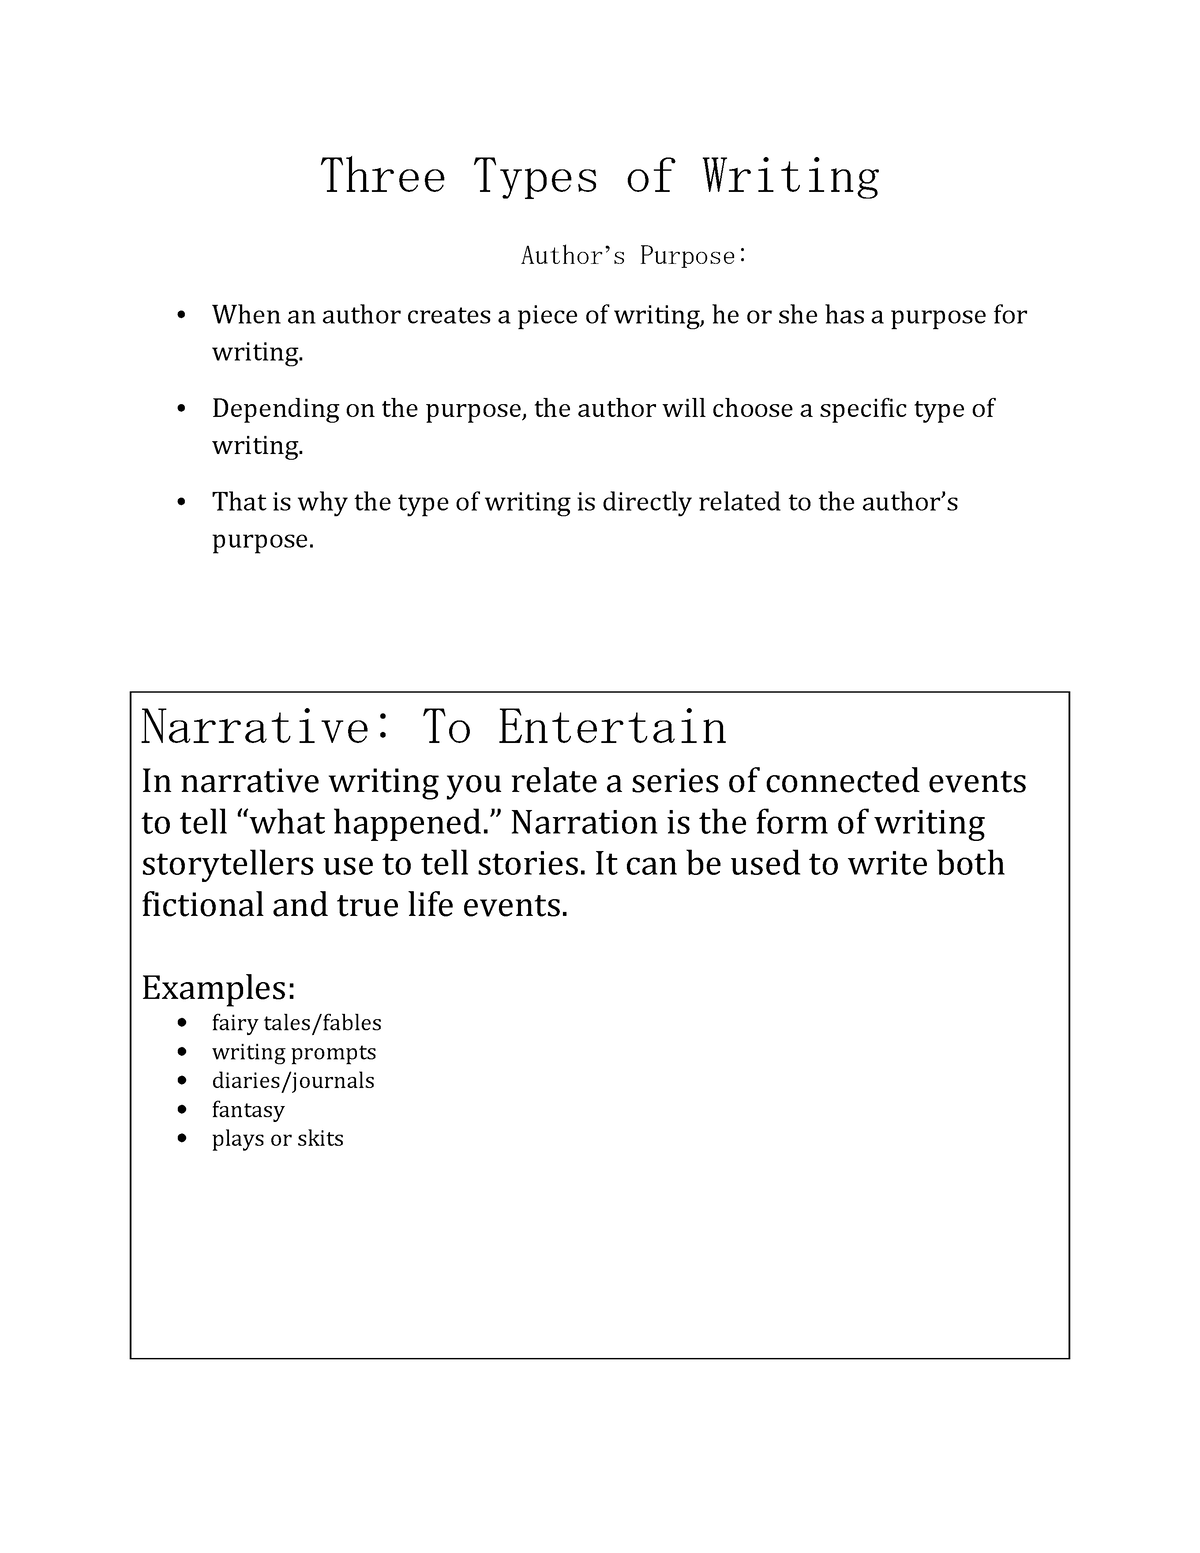 Types of writing - Three Types of Writing Author’s Purpose: When an ...